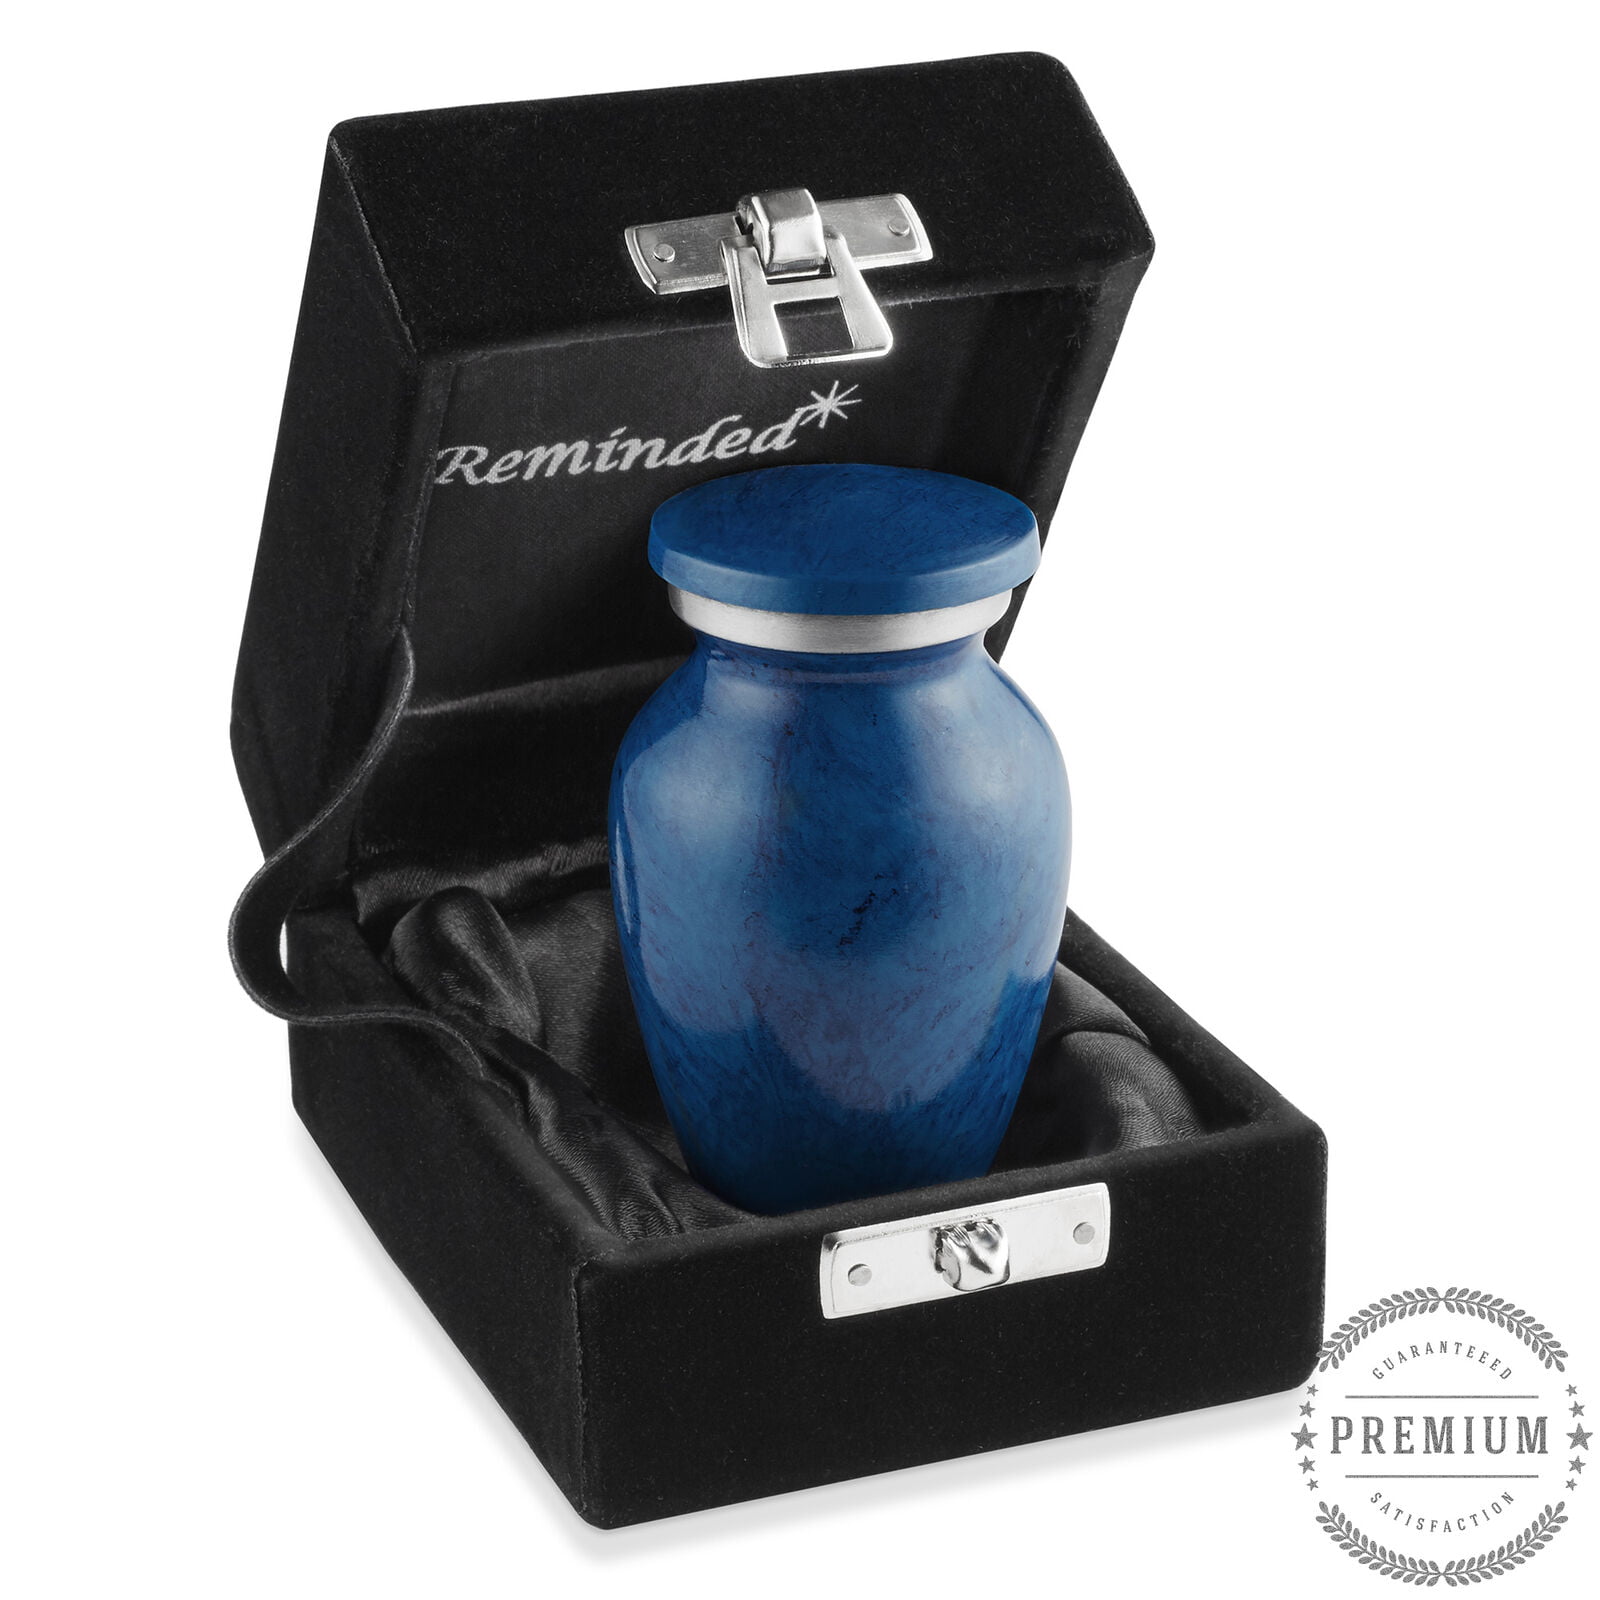 Blue teardrop keepsake sharing ashes memorial urn for ashes small cremation urn 